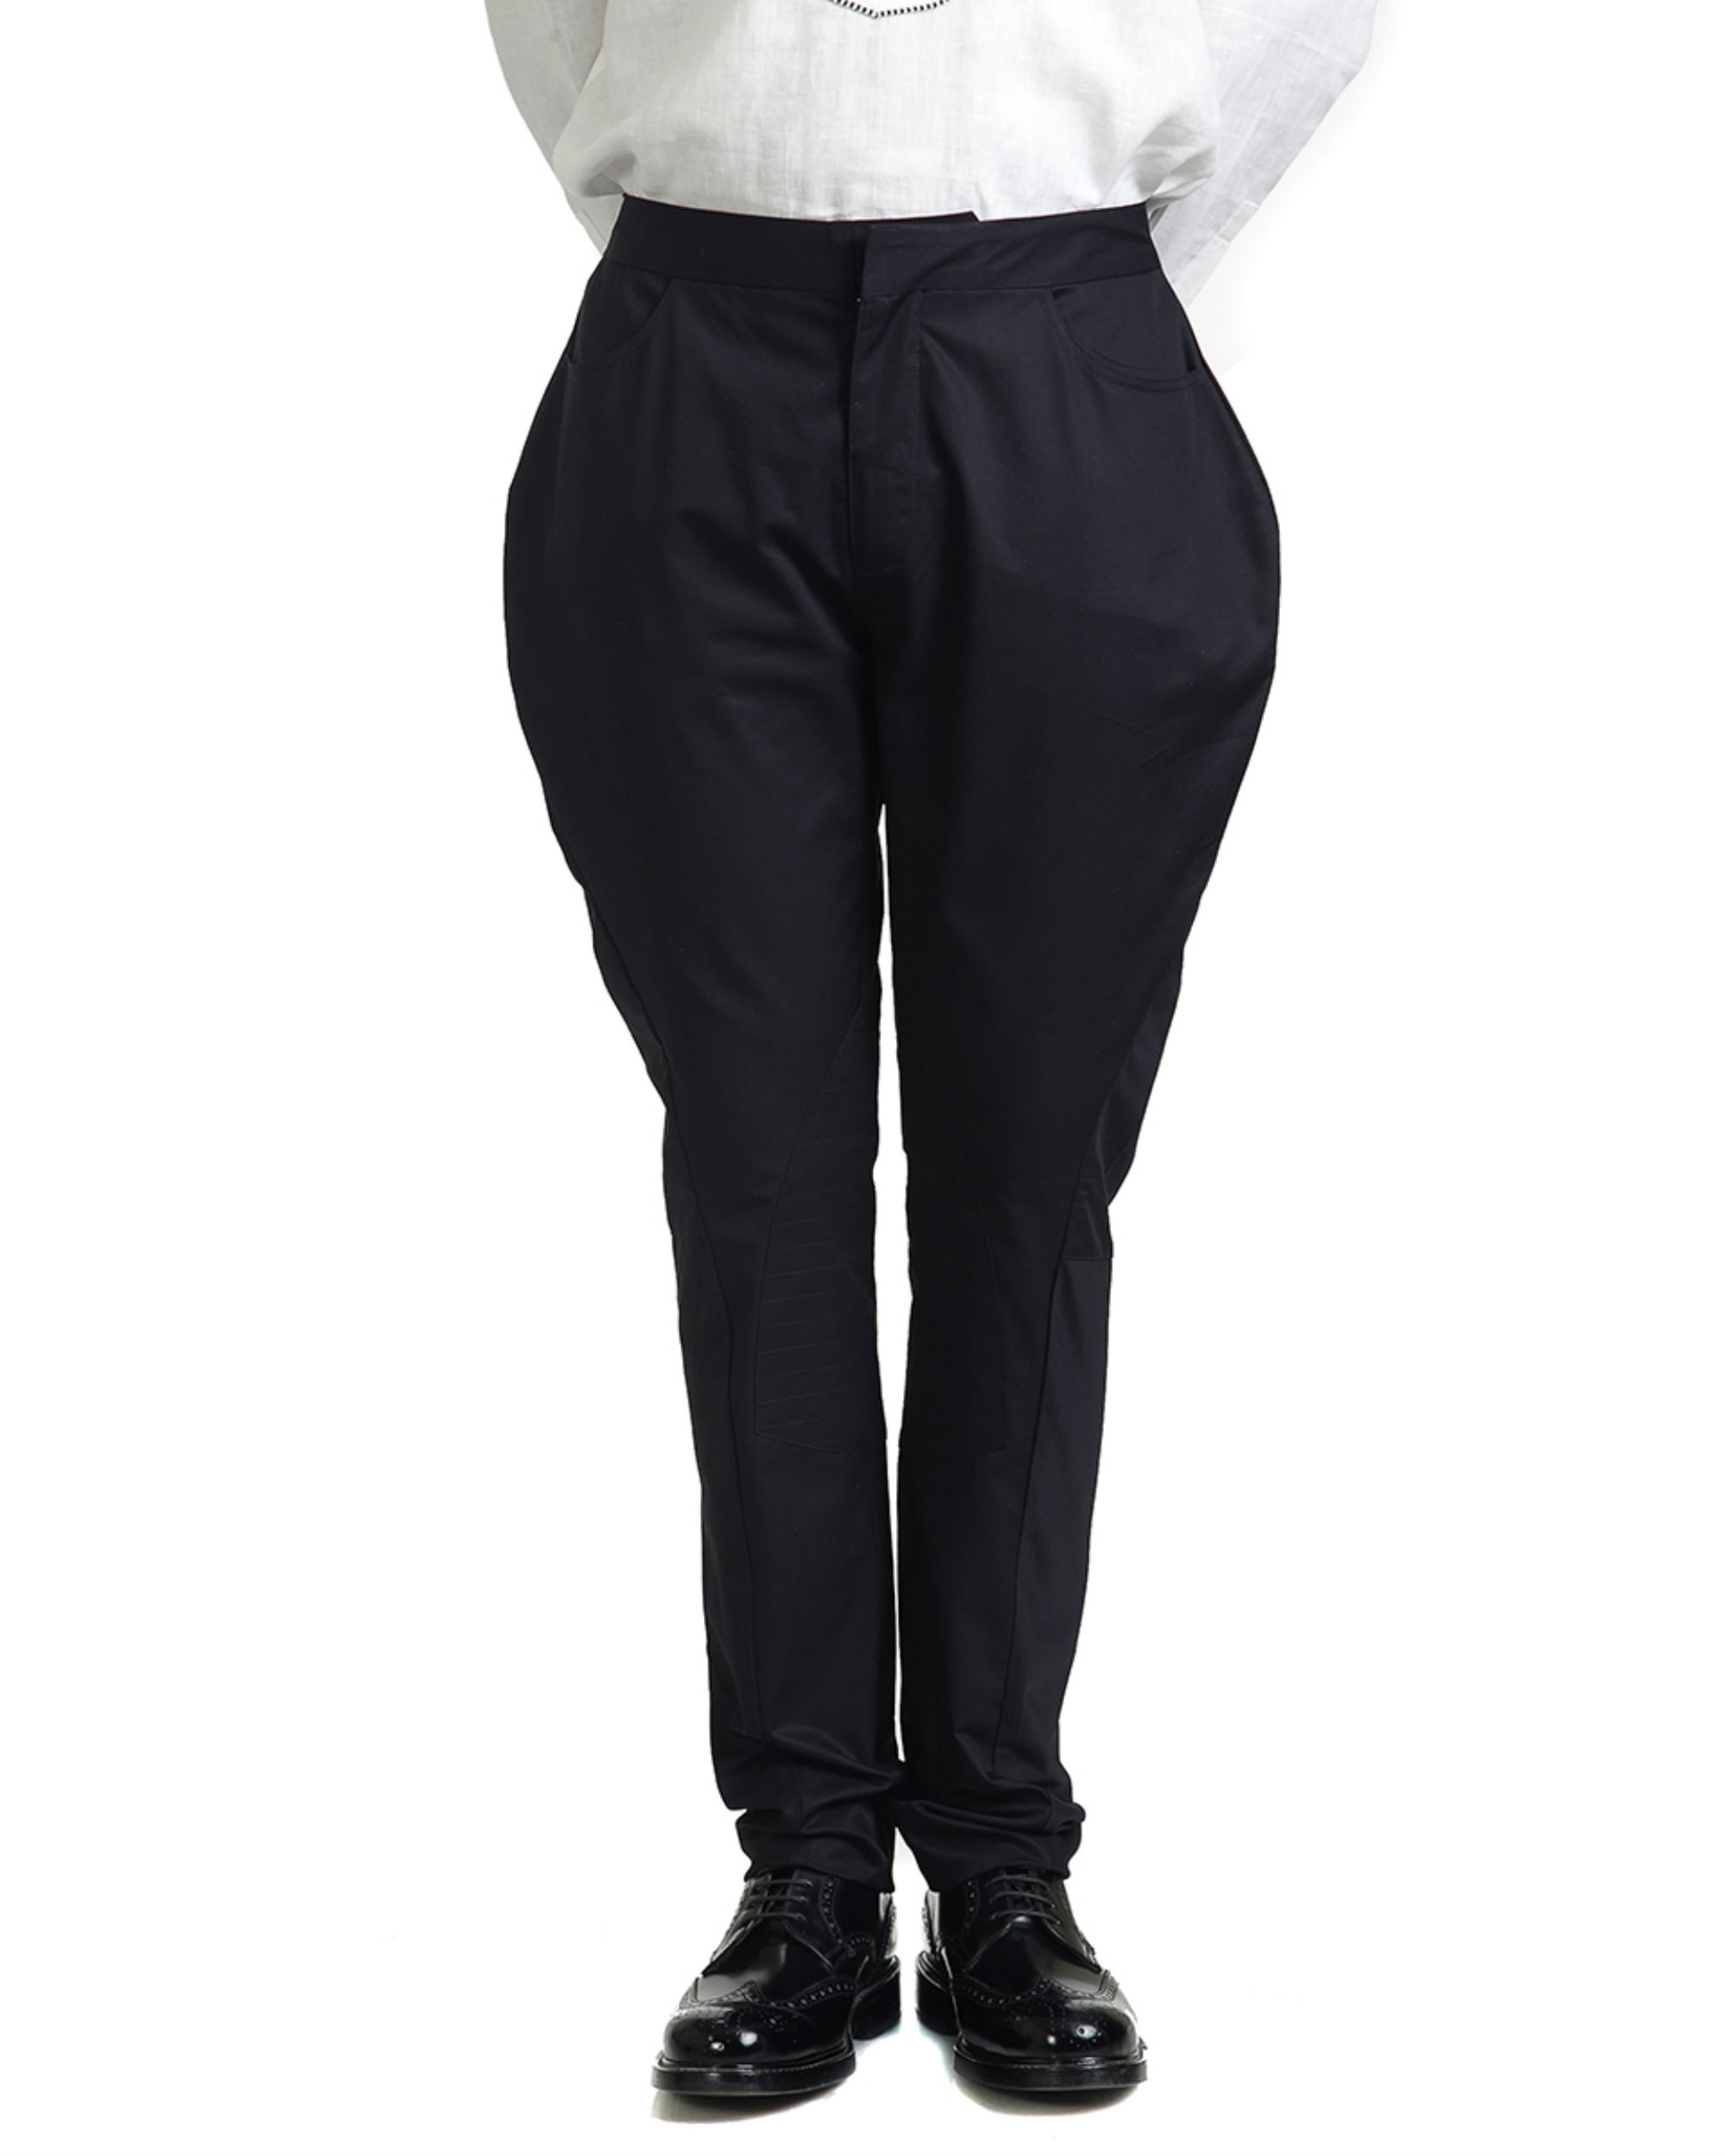 Pin by Evan Exempt on Exempt Style  Jodhpur pants Fashion Breeches